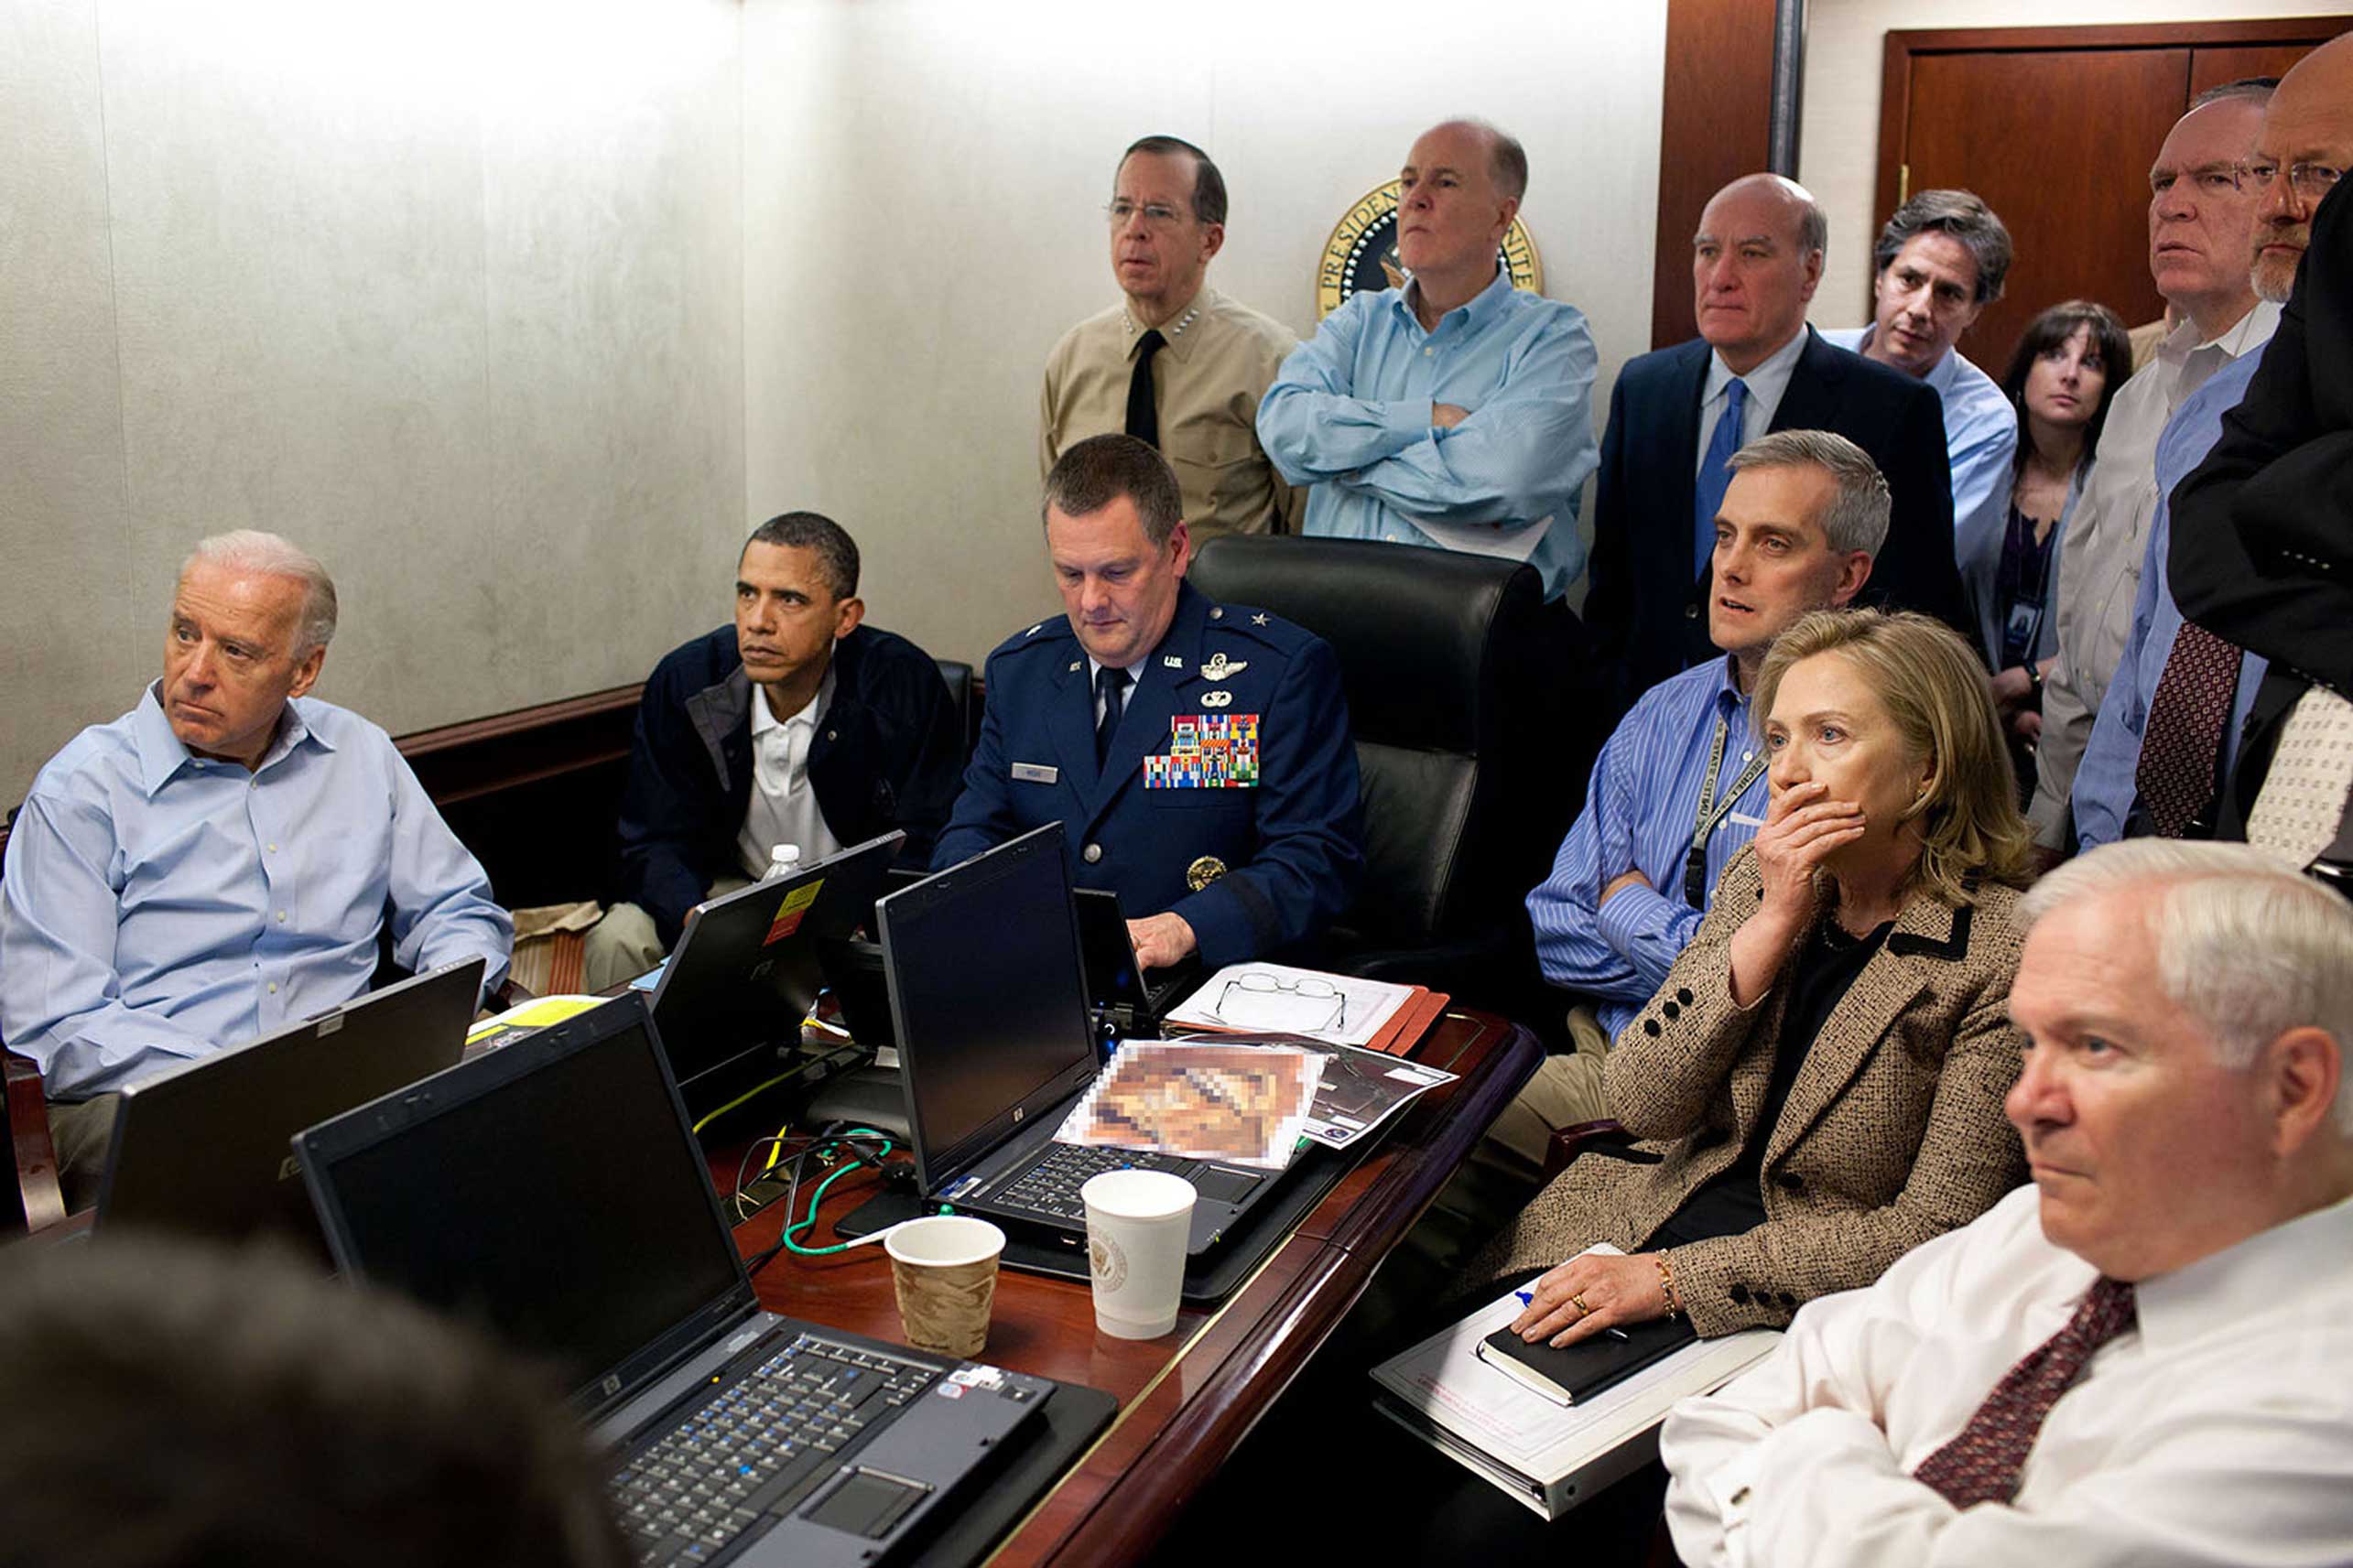 Seated in this picture from left to right: Vice President Biden, the President, Brig. Gen. Webb, Deputy National Security Advisor Denis McDonough, Secretary of State Hillary Rodham Clinton, and then Secretary of Defense Robert Gates. Standing, from left, are: Admiral Mike Mullen, then Chairman of the Joint Chiefs of Staff; National Security Advisor Tom Donilon; Chief of Staff Bill Daley; Tony Blinken, National Security Advisor to the Vice President; Audrey Tomason Director for Counterterrorism; John Brennan, Assistant to the President for Homeland Security and Counterterrorism; and Director of National Intelligence James Clapper. May 1, 2011